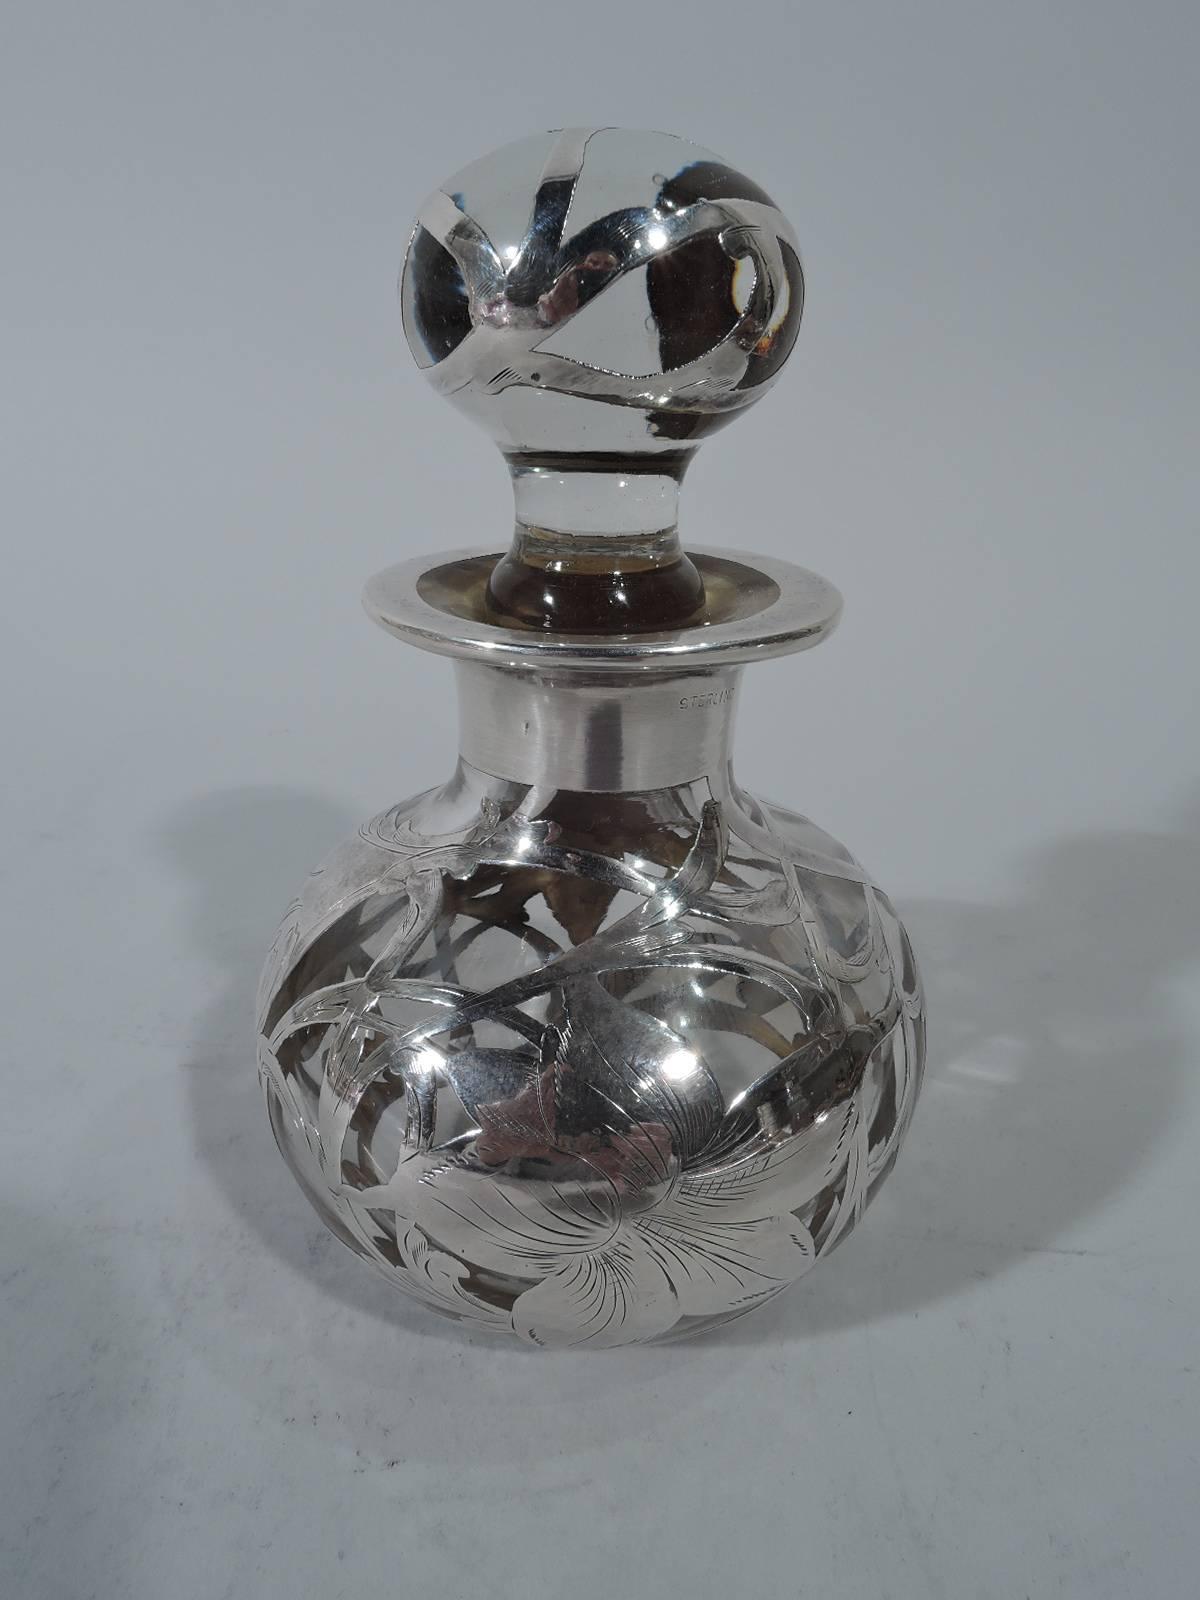 American Art Nouveau silver clear glass perfume bottle with silver overlay. Globular with short neck. Ball stopper with short plug. Silver overlay heightened with engraving: Loose and intertwining scrollwork and big blooms. Unmarked.